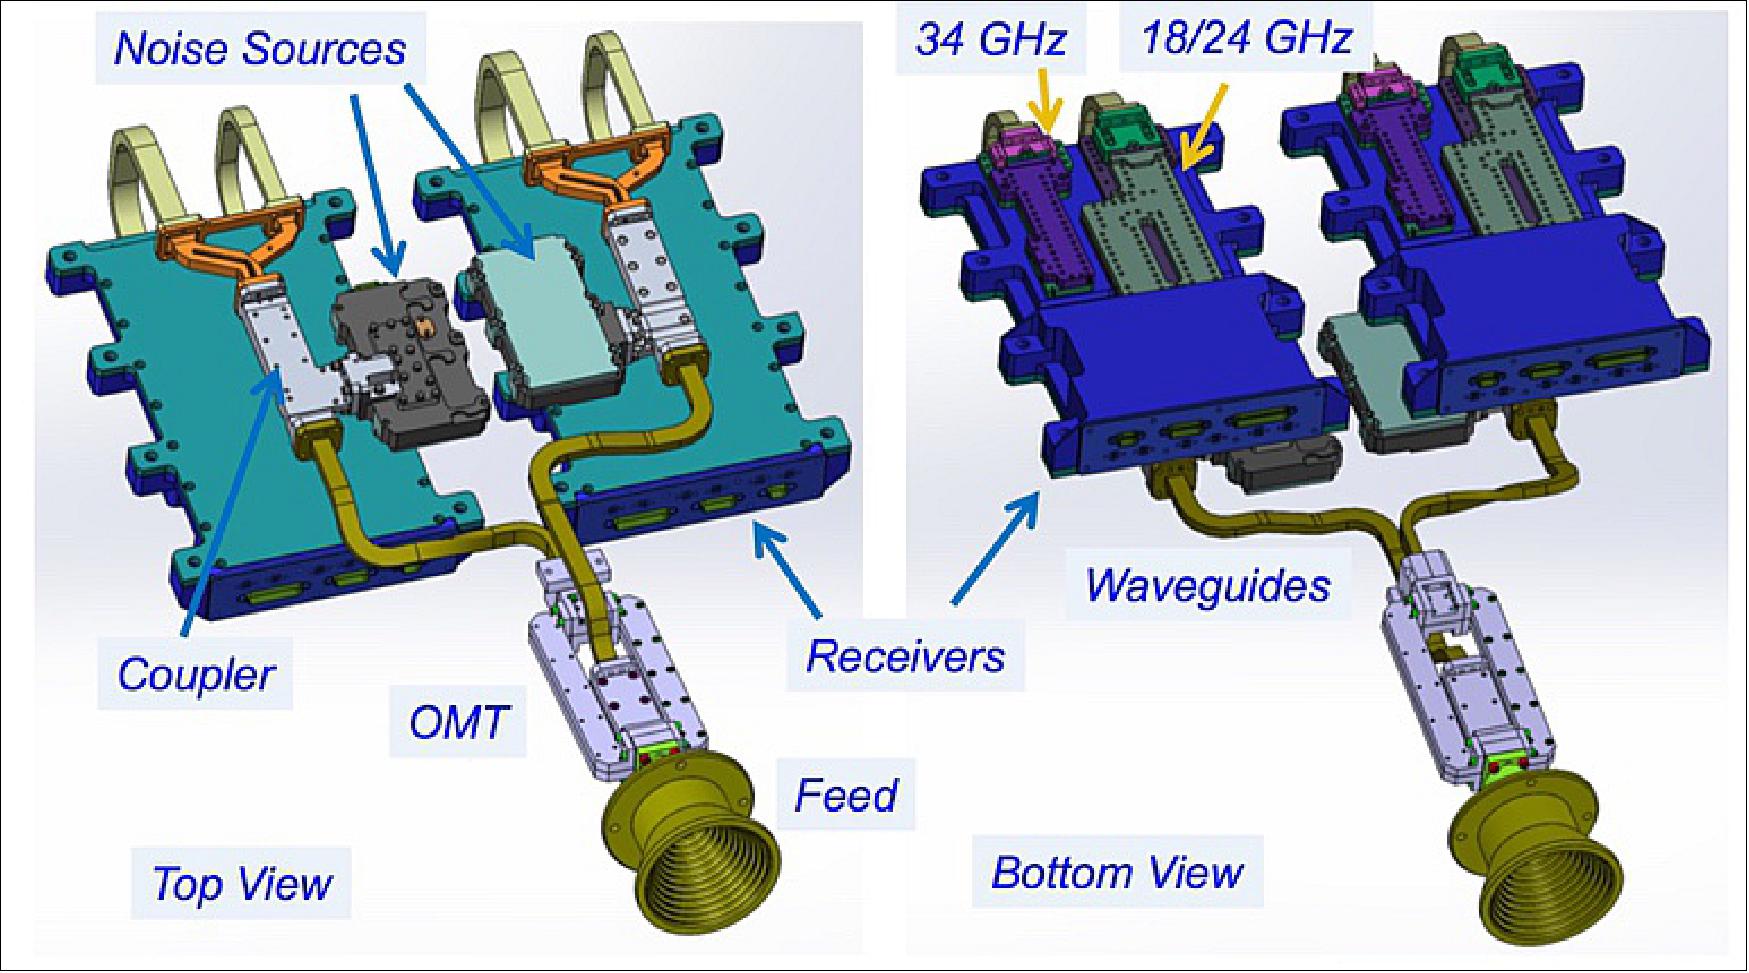 Figure 38: Top and bottom views of the AMR receivers for 18/24 and 34 GHz (image credit: NASA/JPL)